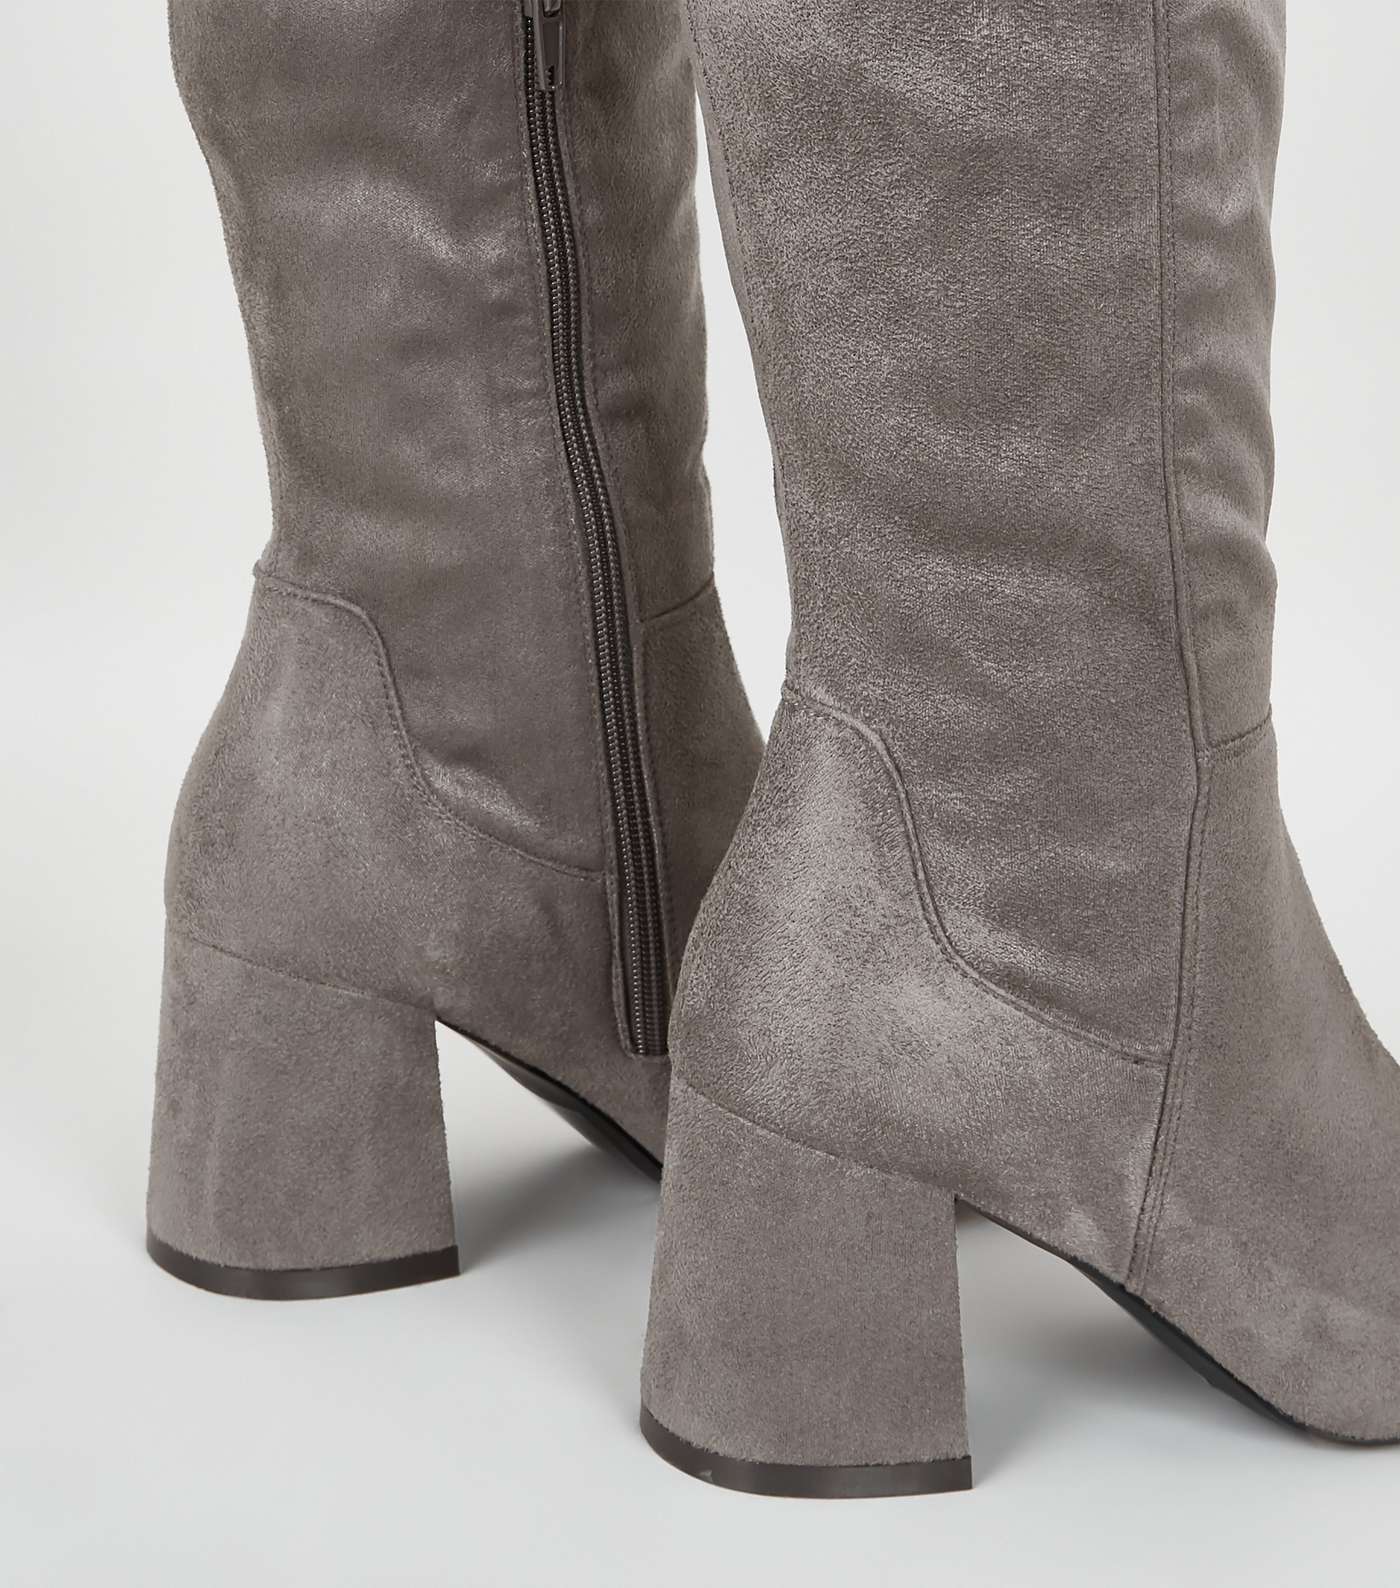 Wide Fit Grey Flared Heel Knee High Boots Image 3